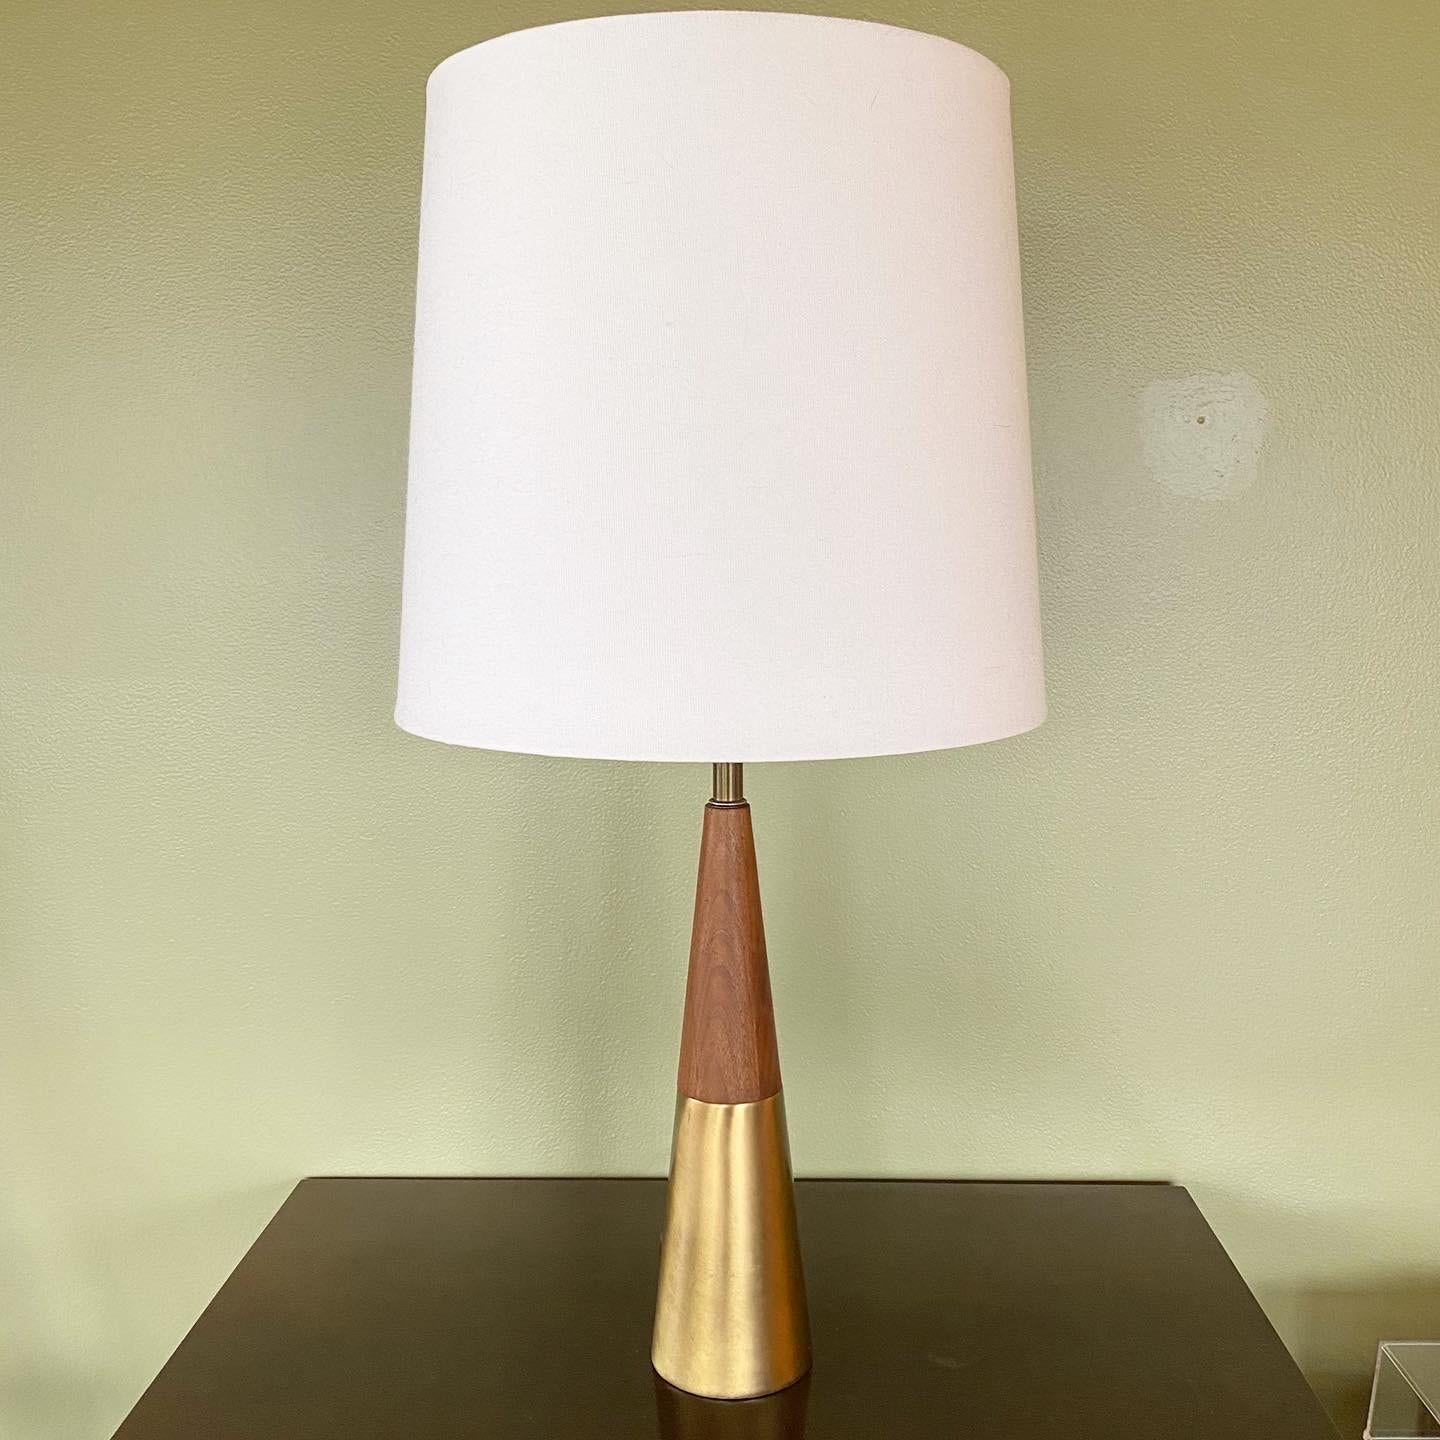 This is a beautiful vintage Midcentury Modern Model D390 Walnut and Brass Lamp Designed by Tony Paul for Westwood Industries, ca. 1958. This size is so accommodating to nearly any room. Whether it's an entry way, bedroom lamp, corner living room